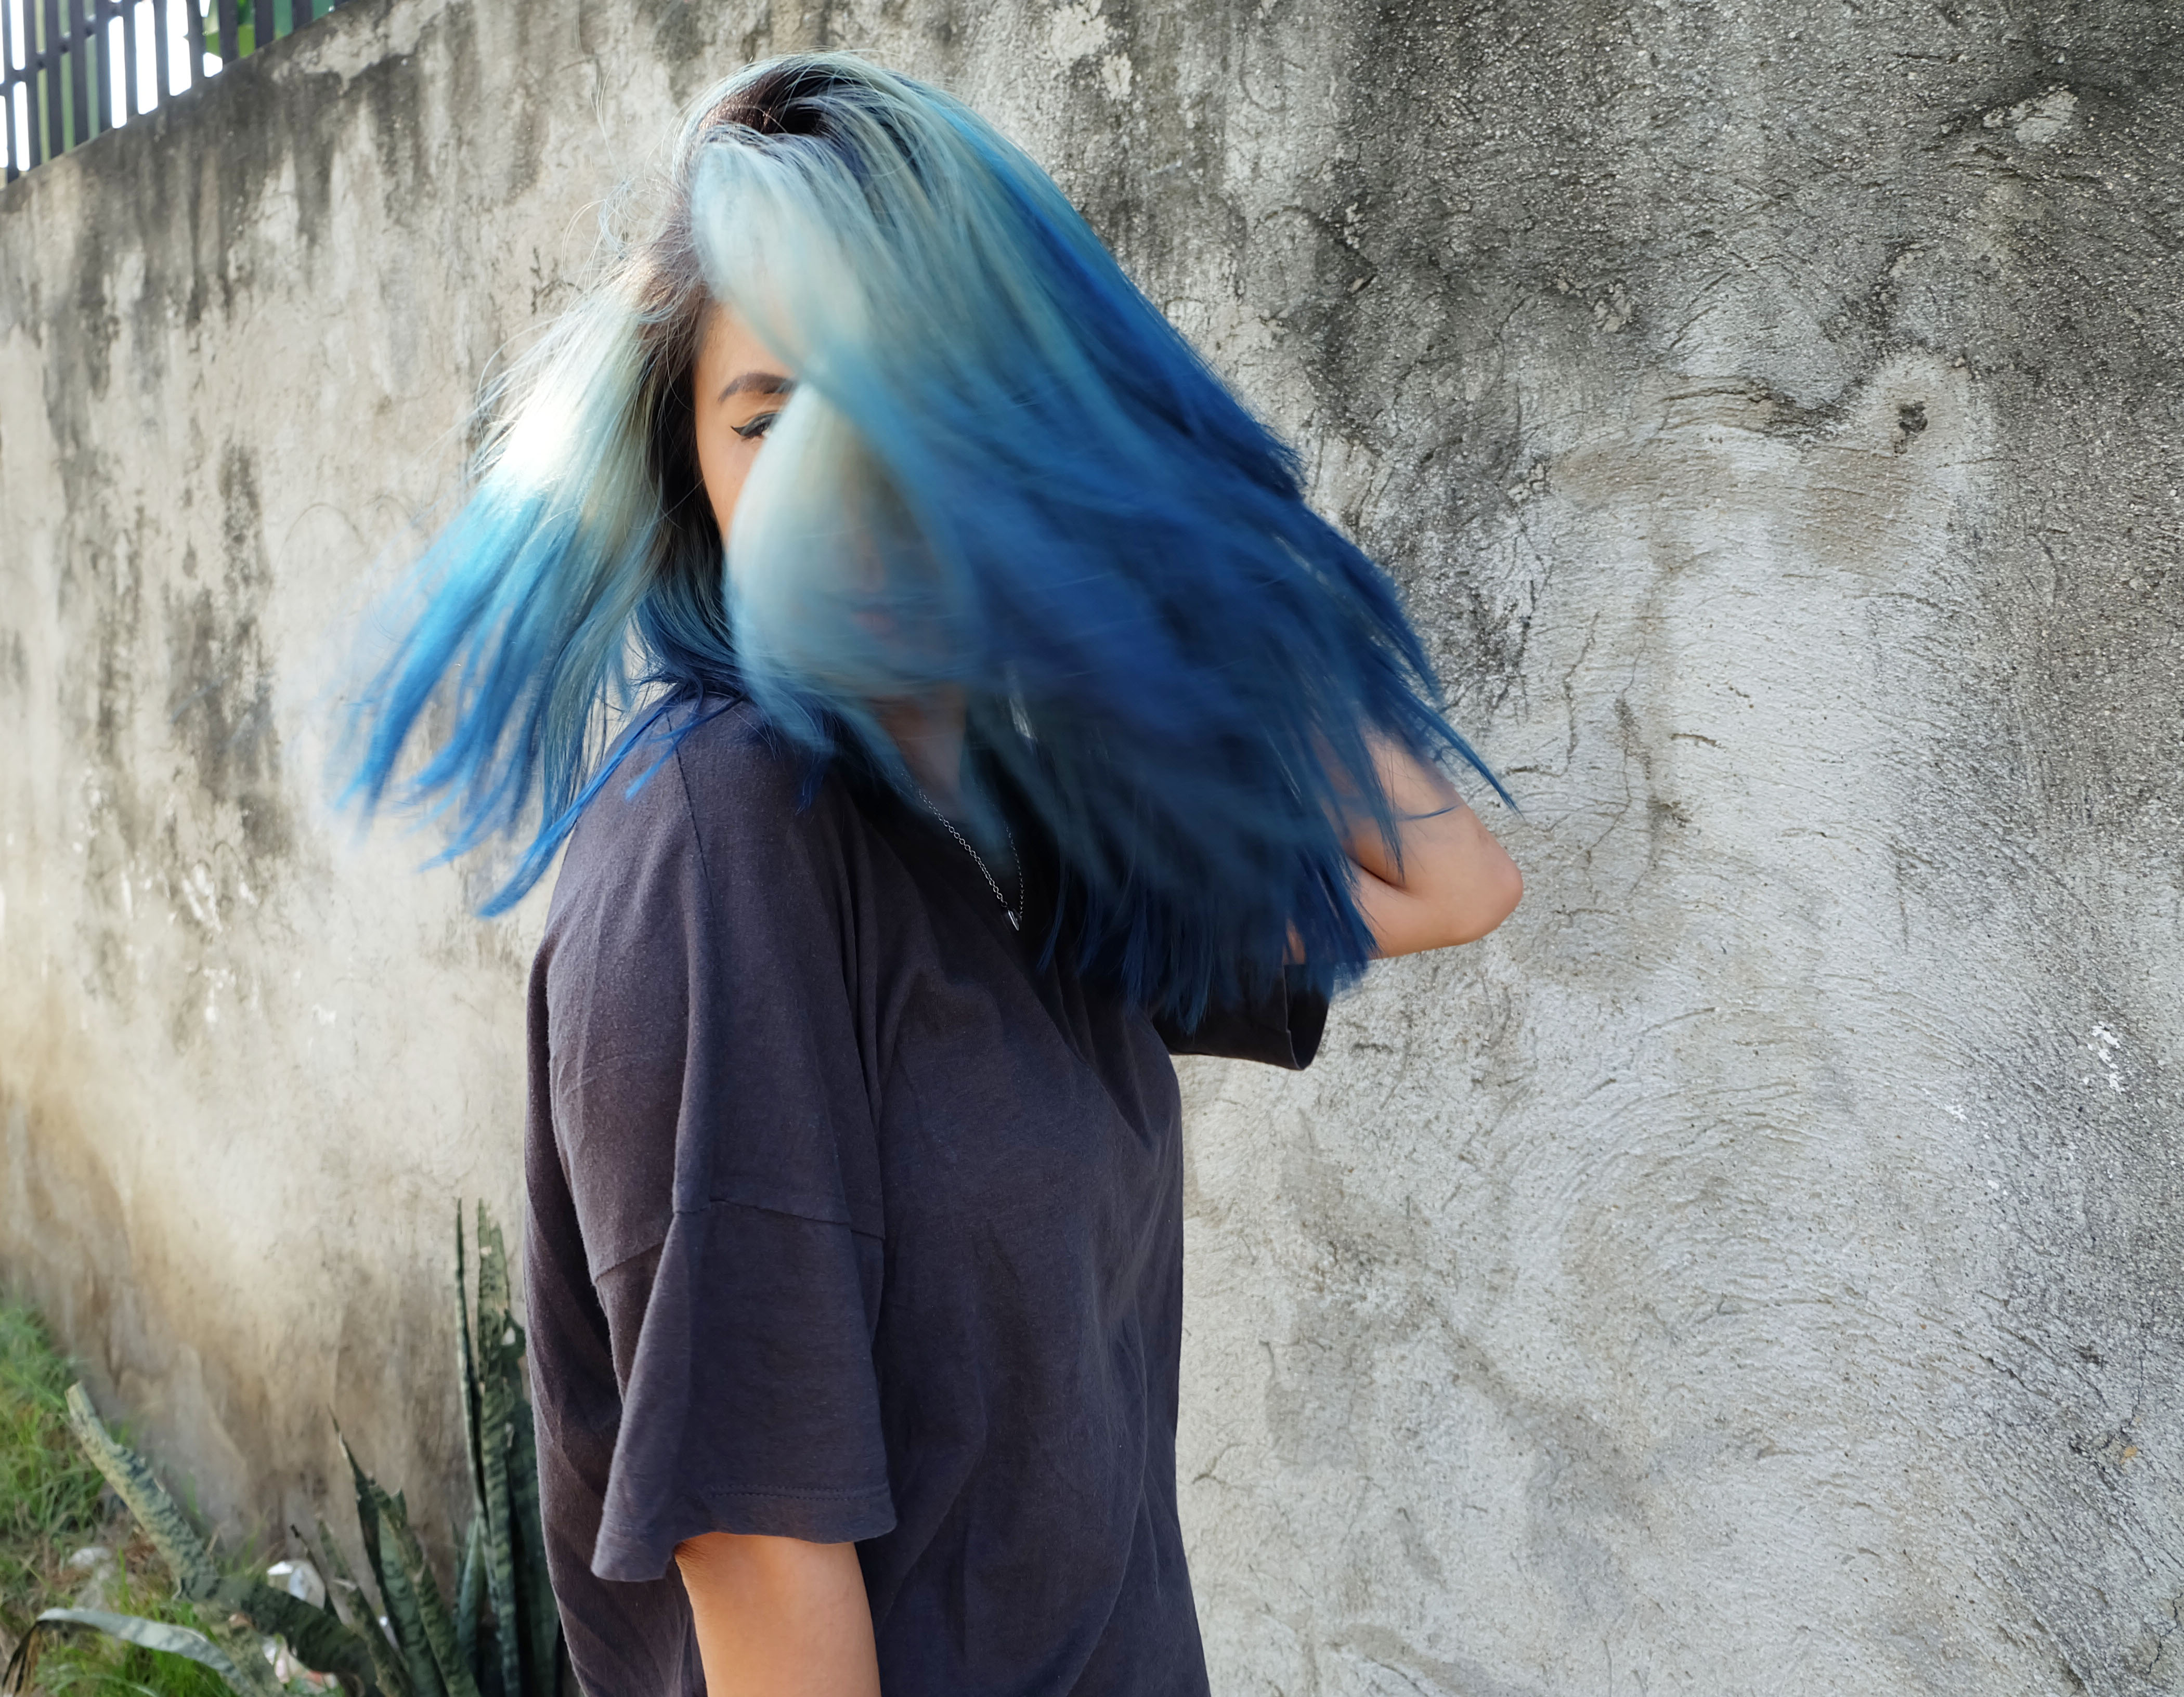 Becoming Blue (It Was Always More Than Just Hair)